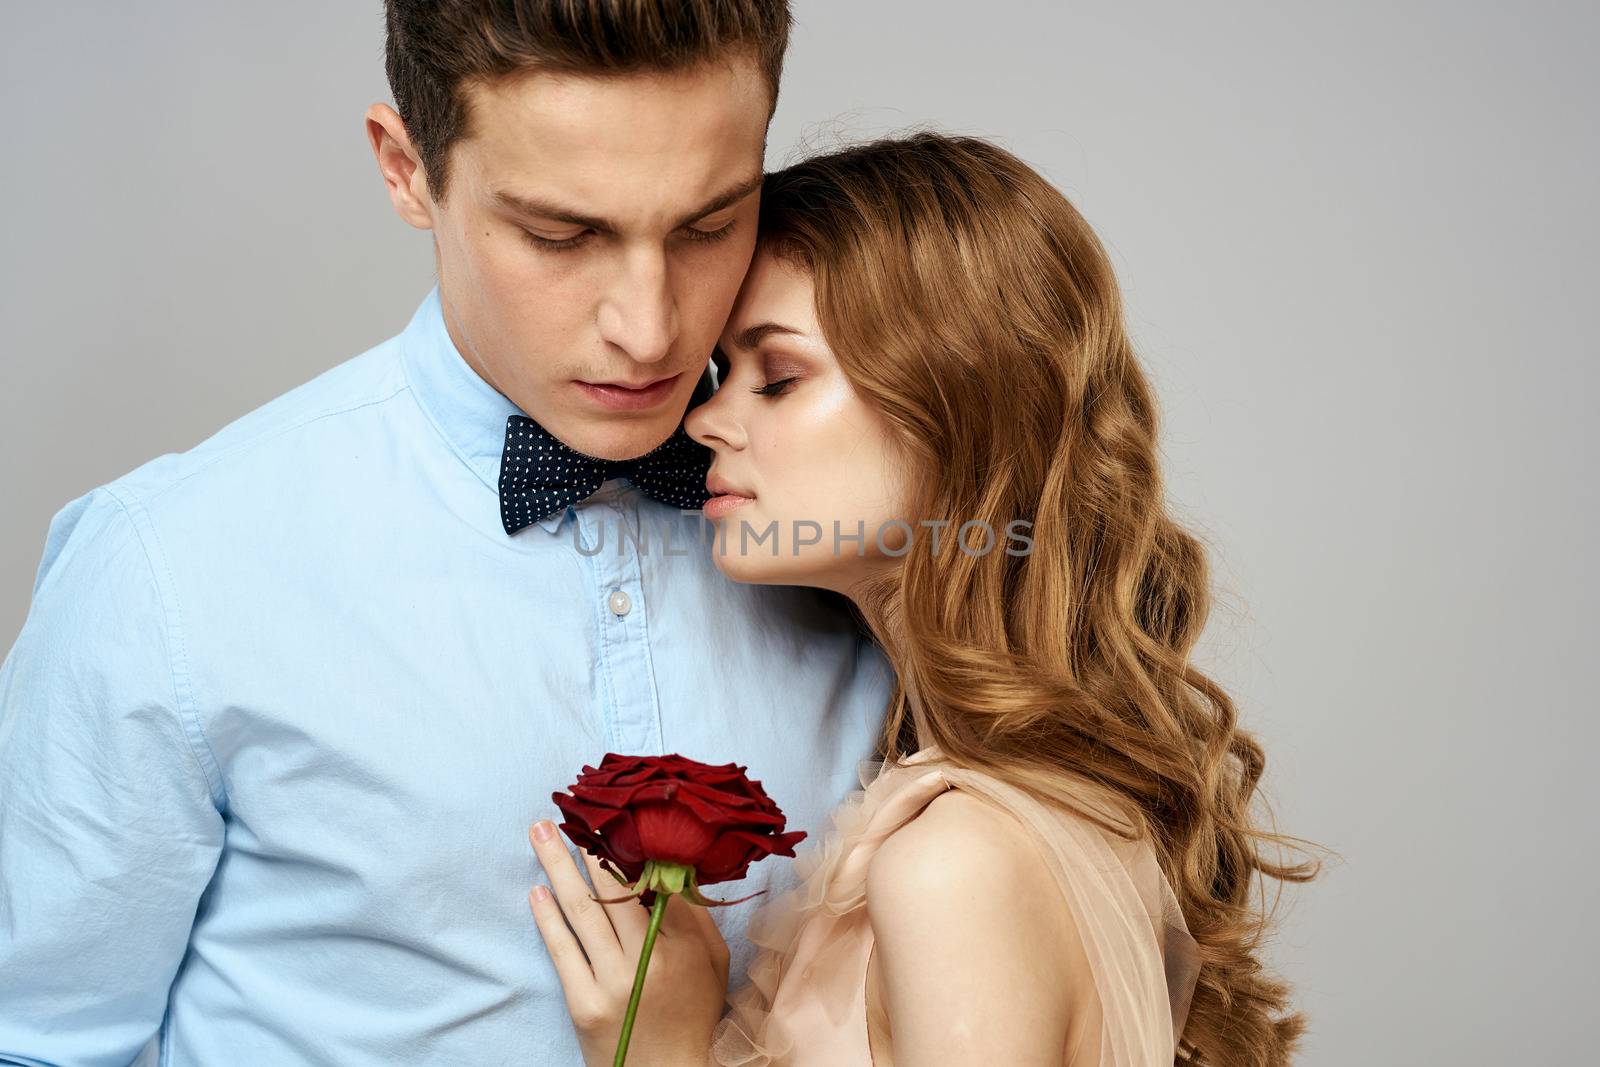 beautiful couple relationship rose gift as romance hug light background by SHOTPRIME